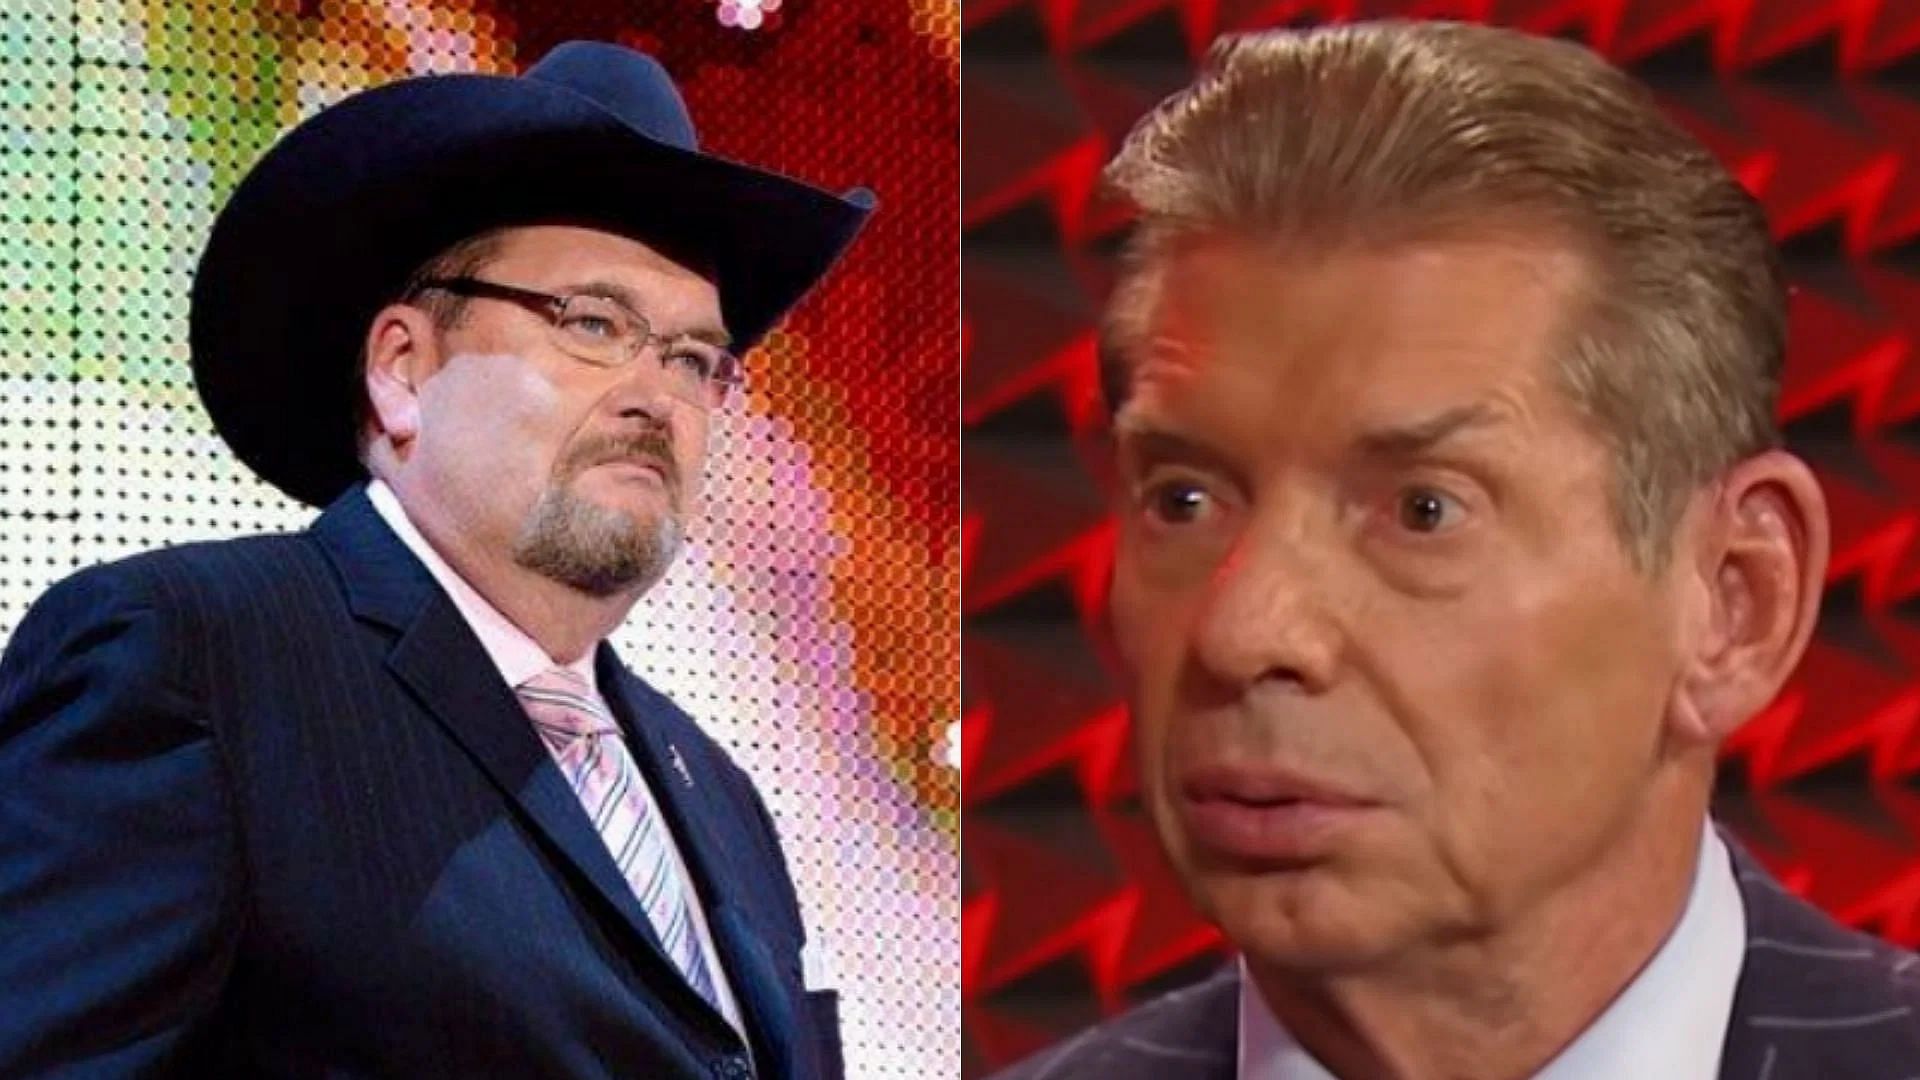 Jim Ross (left) and Vince McMahon (right)